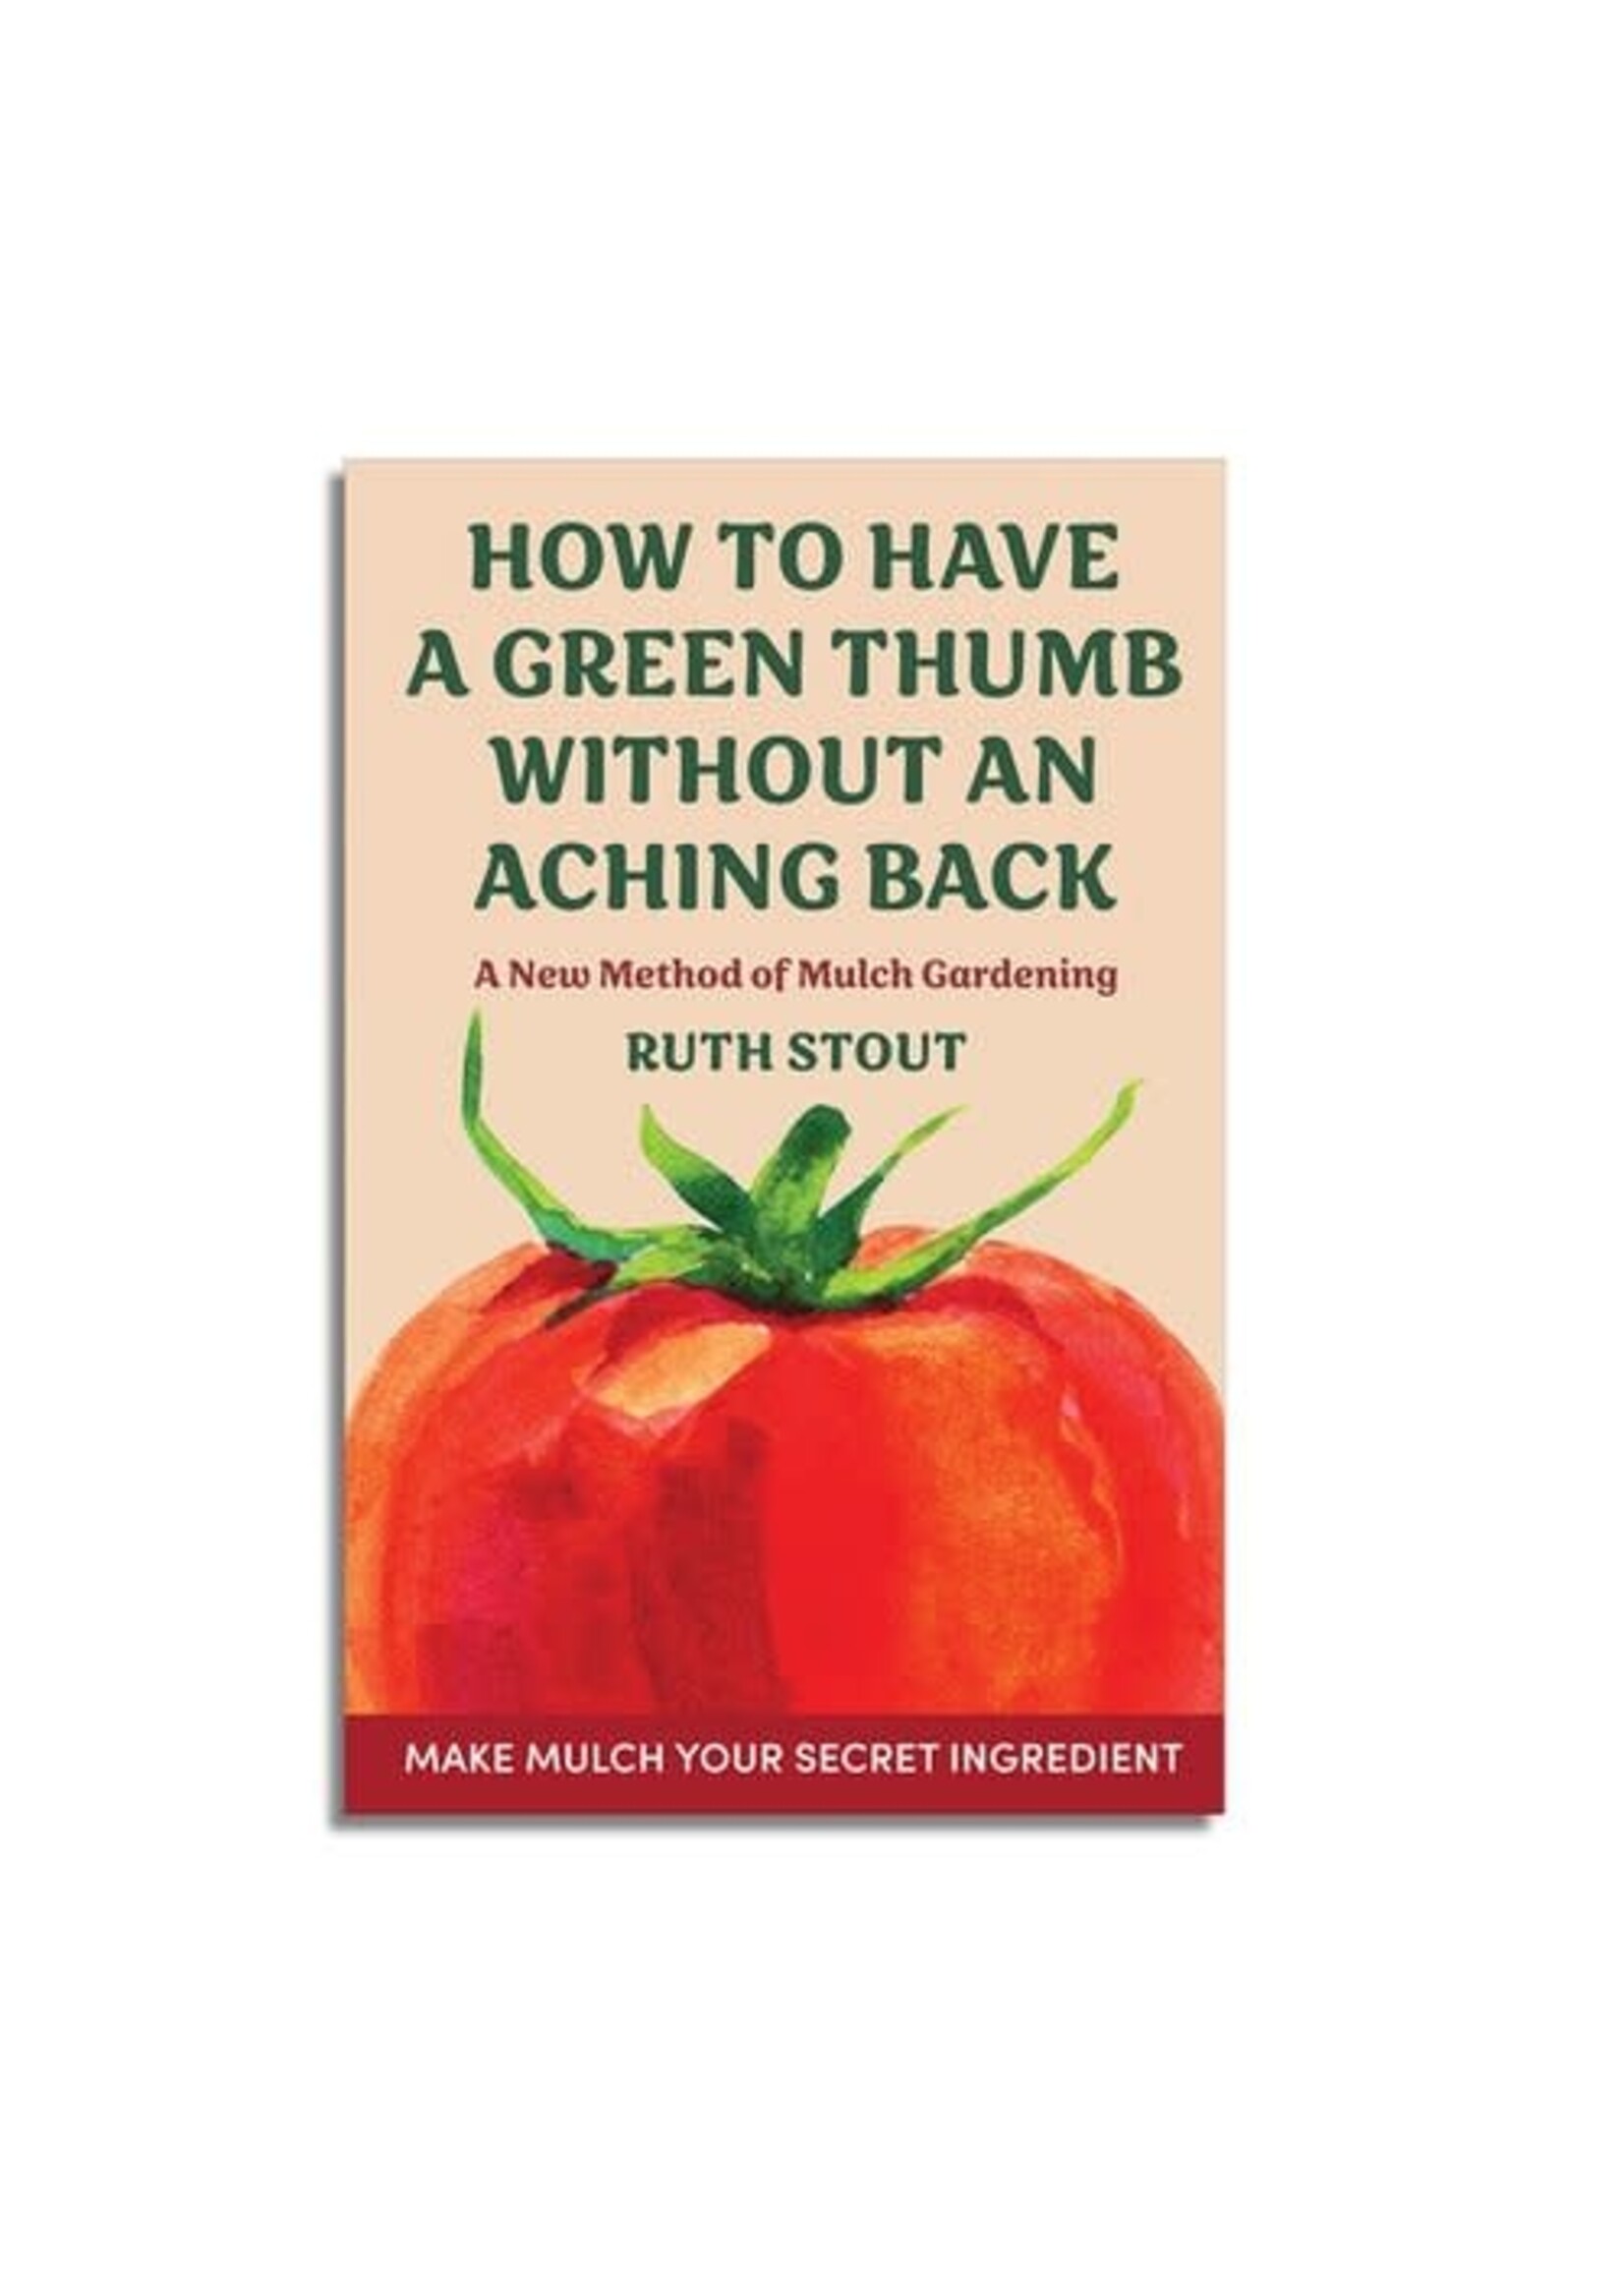 How to Have a Green Thumb: A New Method of Mulch Gardening by Ruth Stout